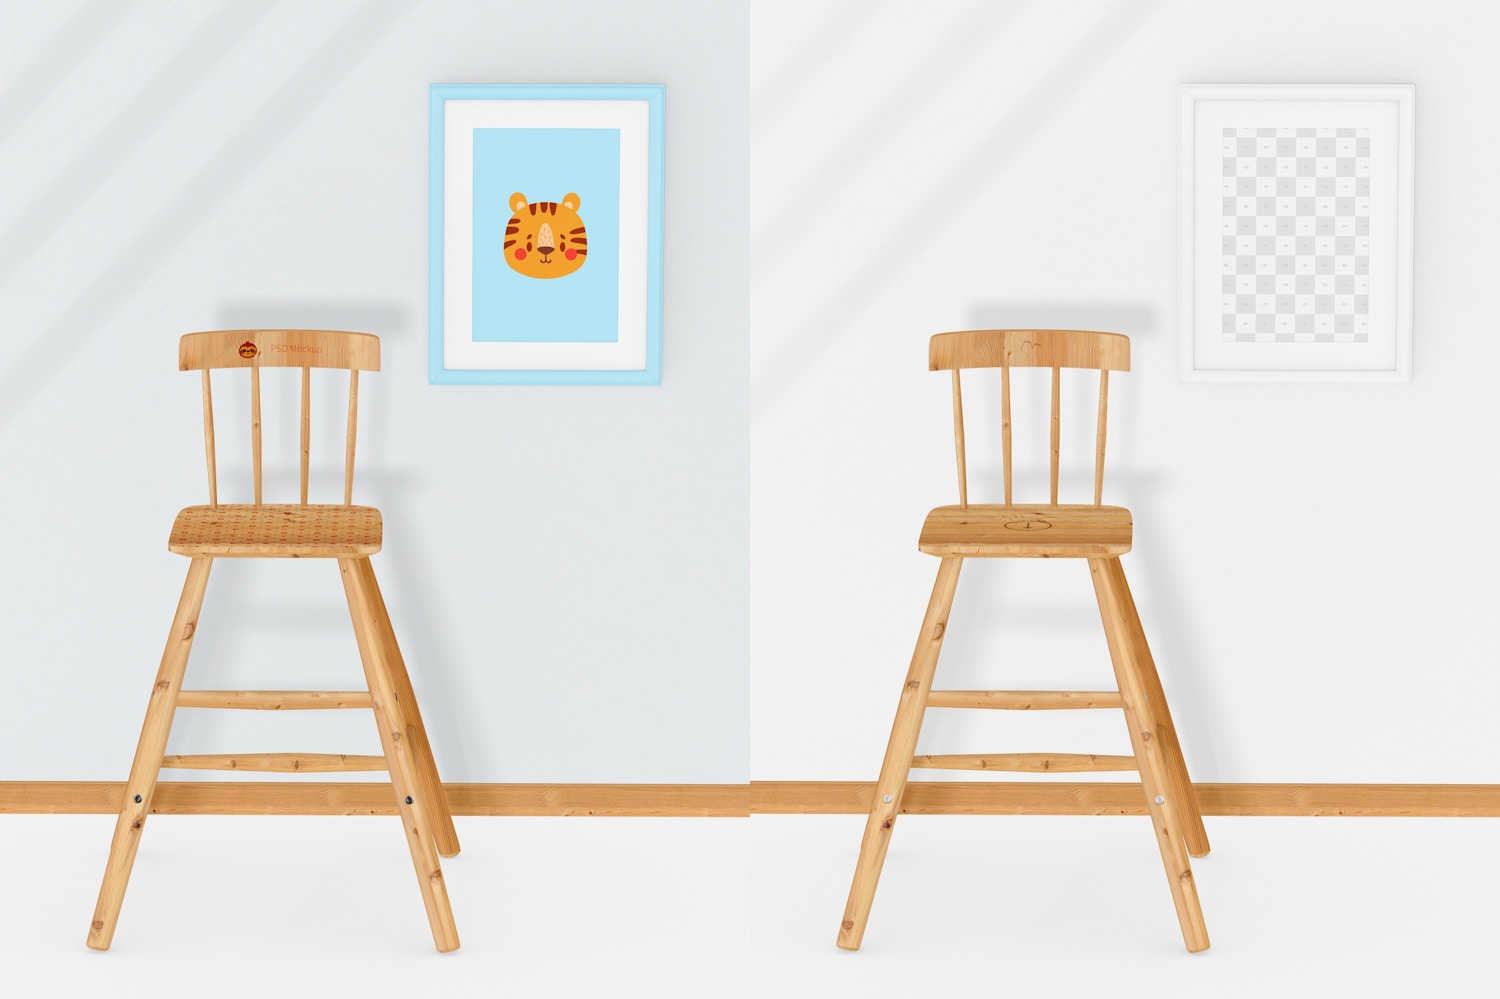 Wooden High Chair for Kids with Wall Mockup